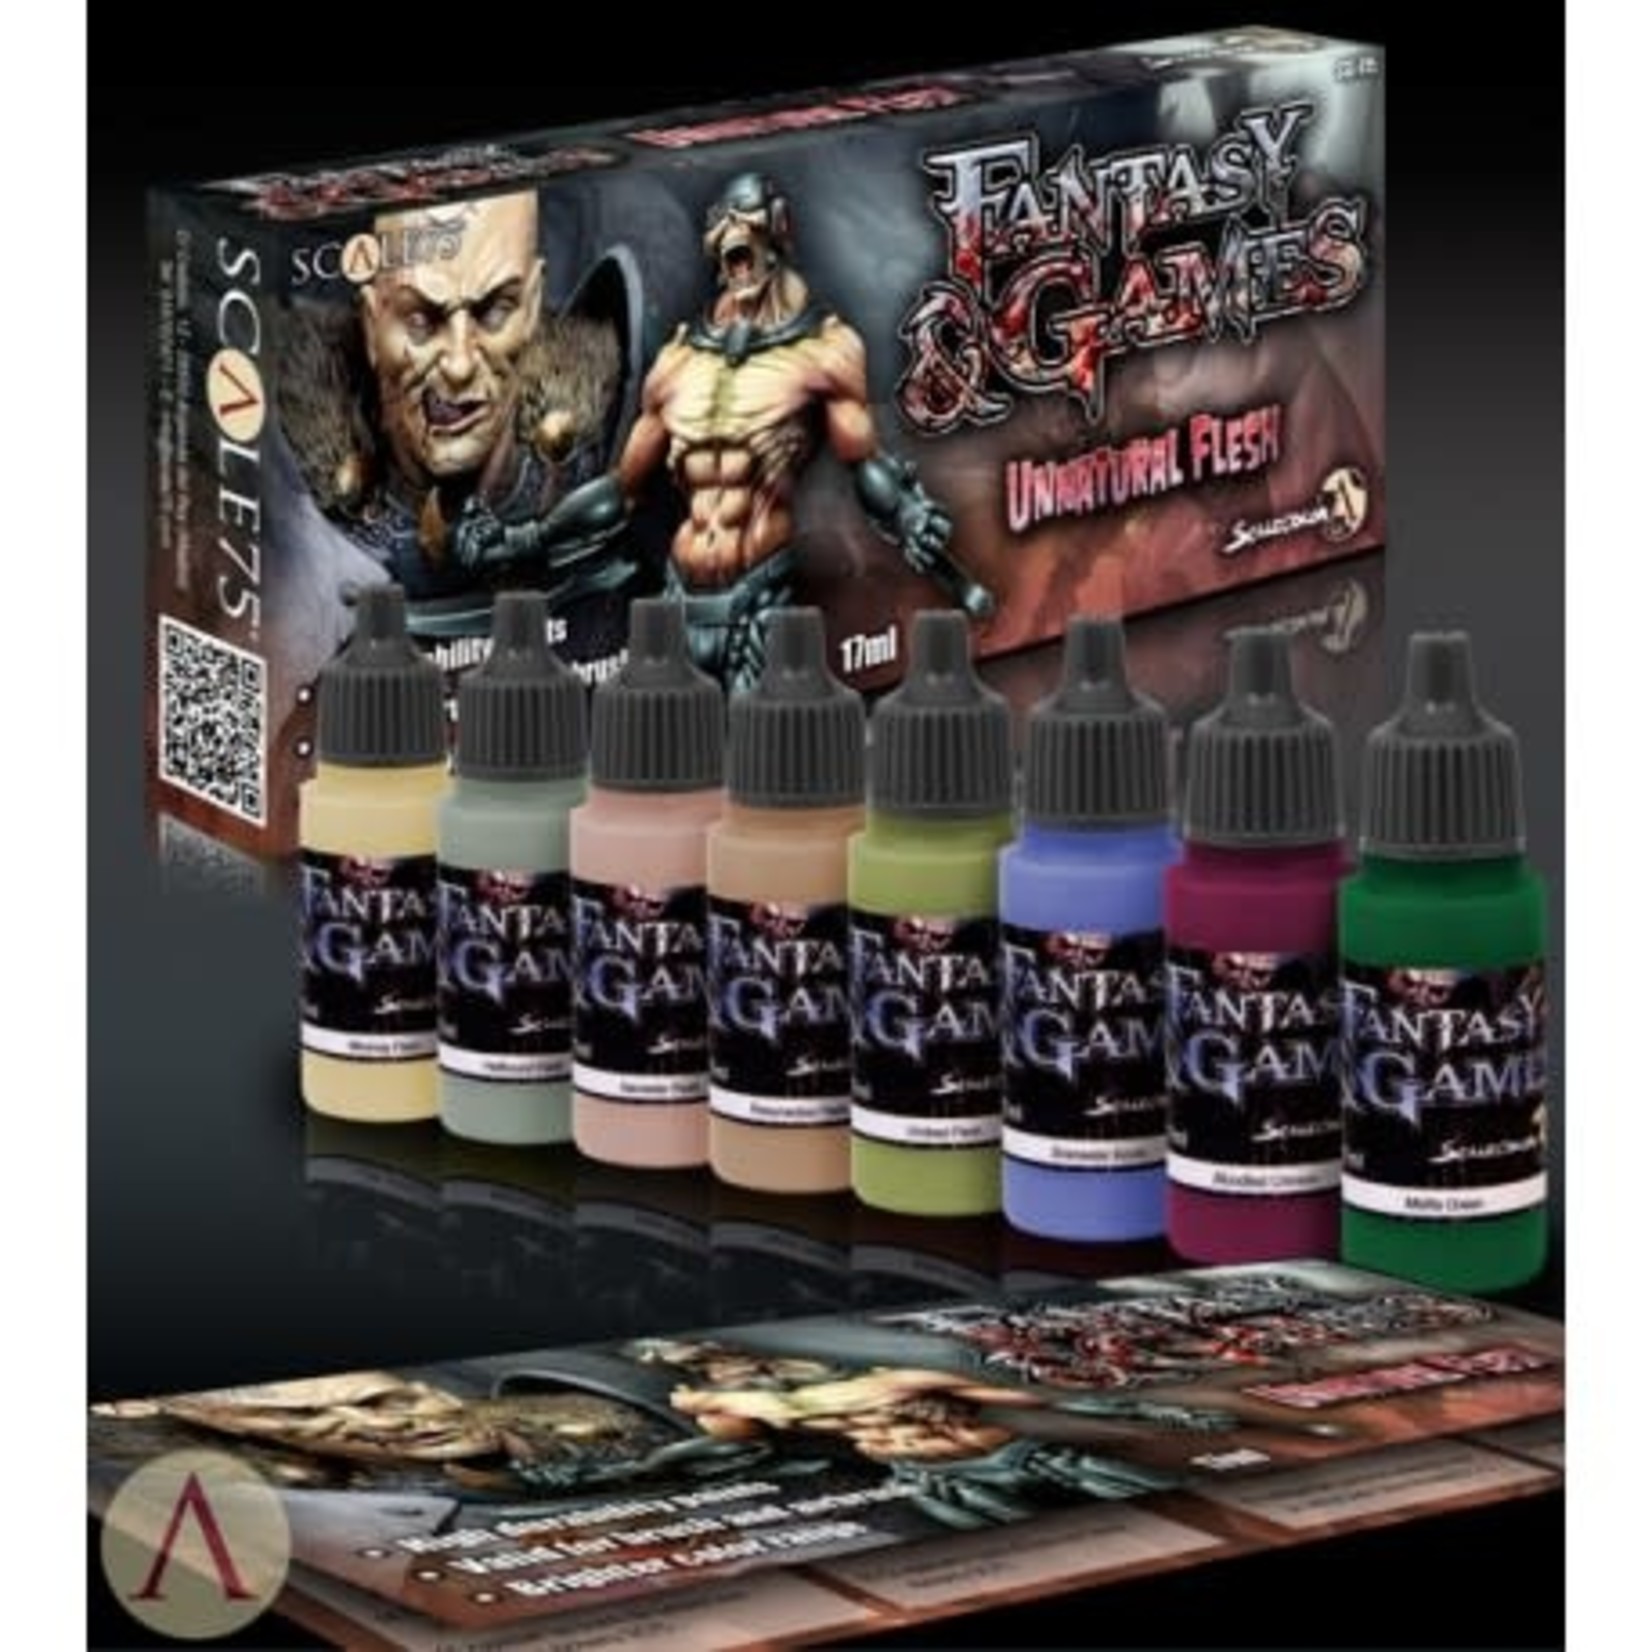 Scale 75 Fantasy and Games SSE015 Unnatural Flesh Paint (8) Set